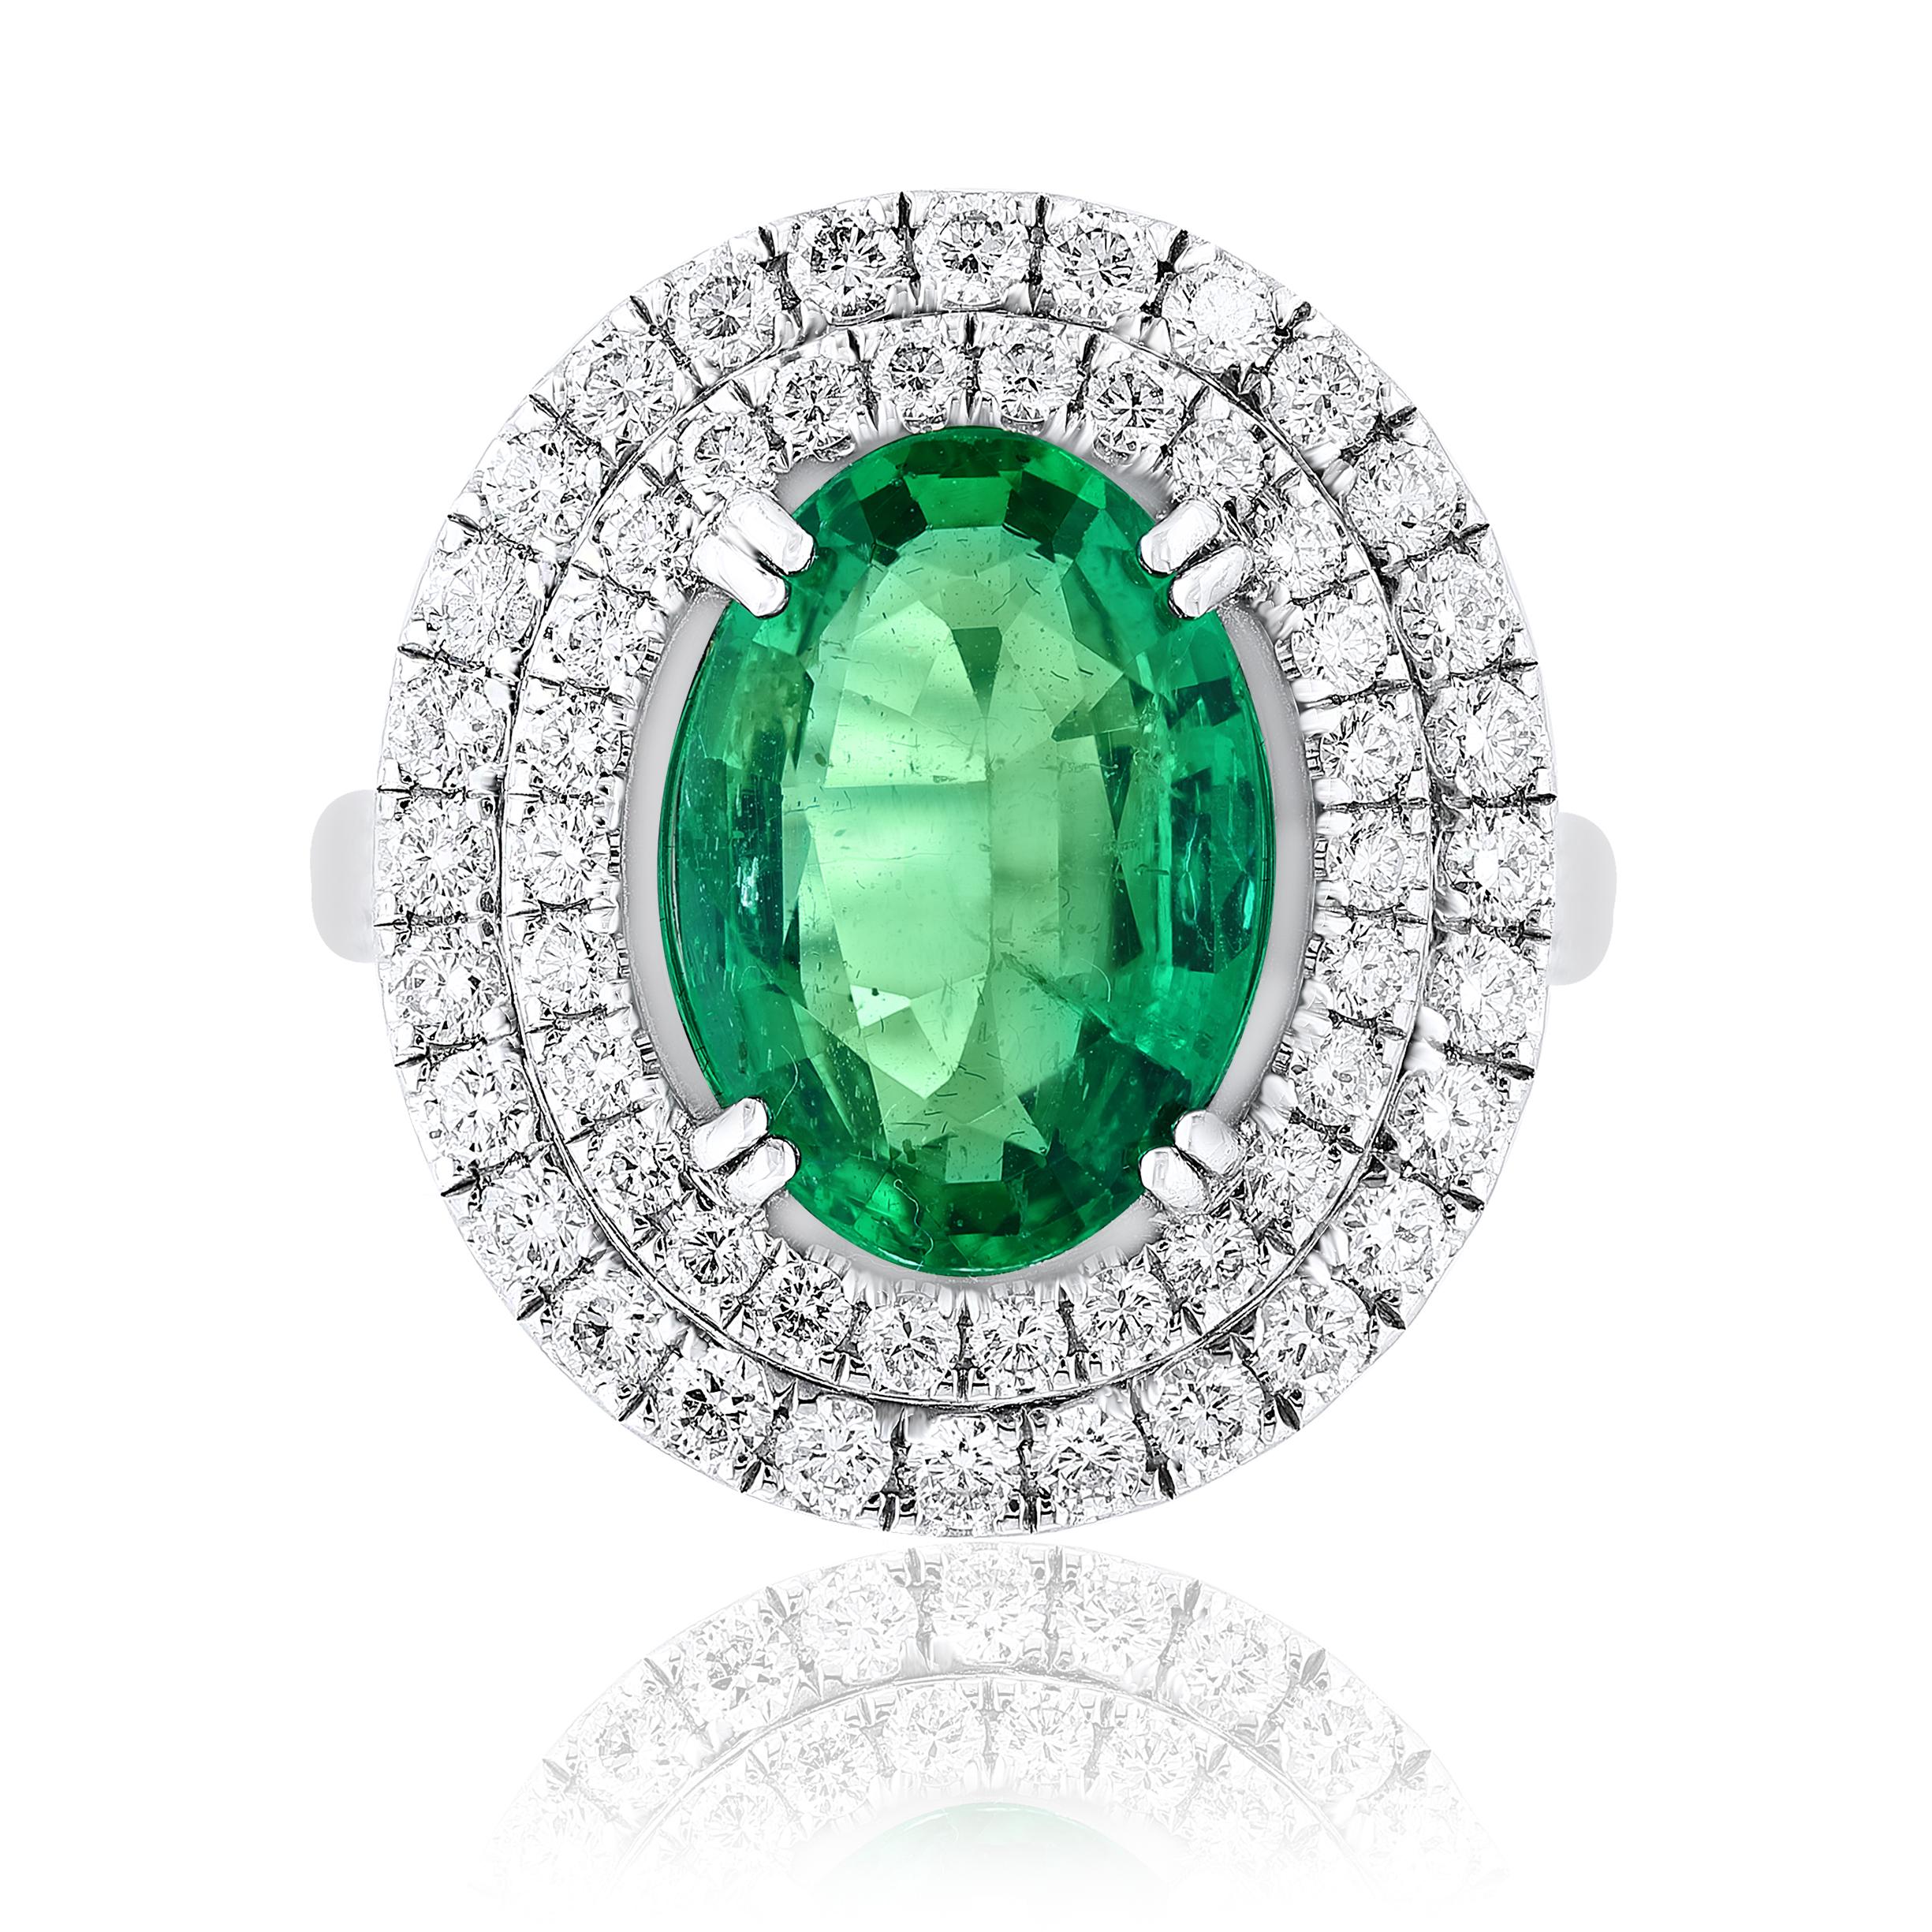 A spectacular engagement ring style showcasing a 4.13-carat oval cut lush green emerald and  Center stone is surrounded by two rows of round brilliant diamonds in an 18k white gold  shank mounting. 94 White diamonds weigh 1.45 carats total. Size 6.5